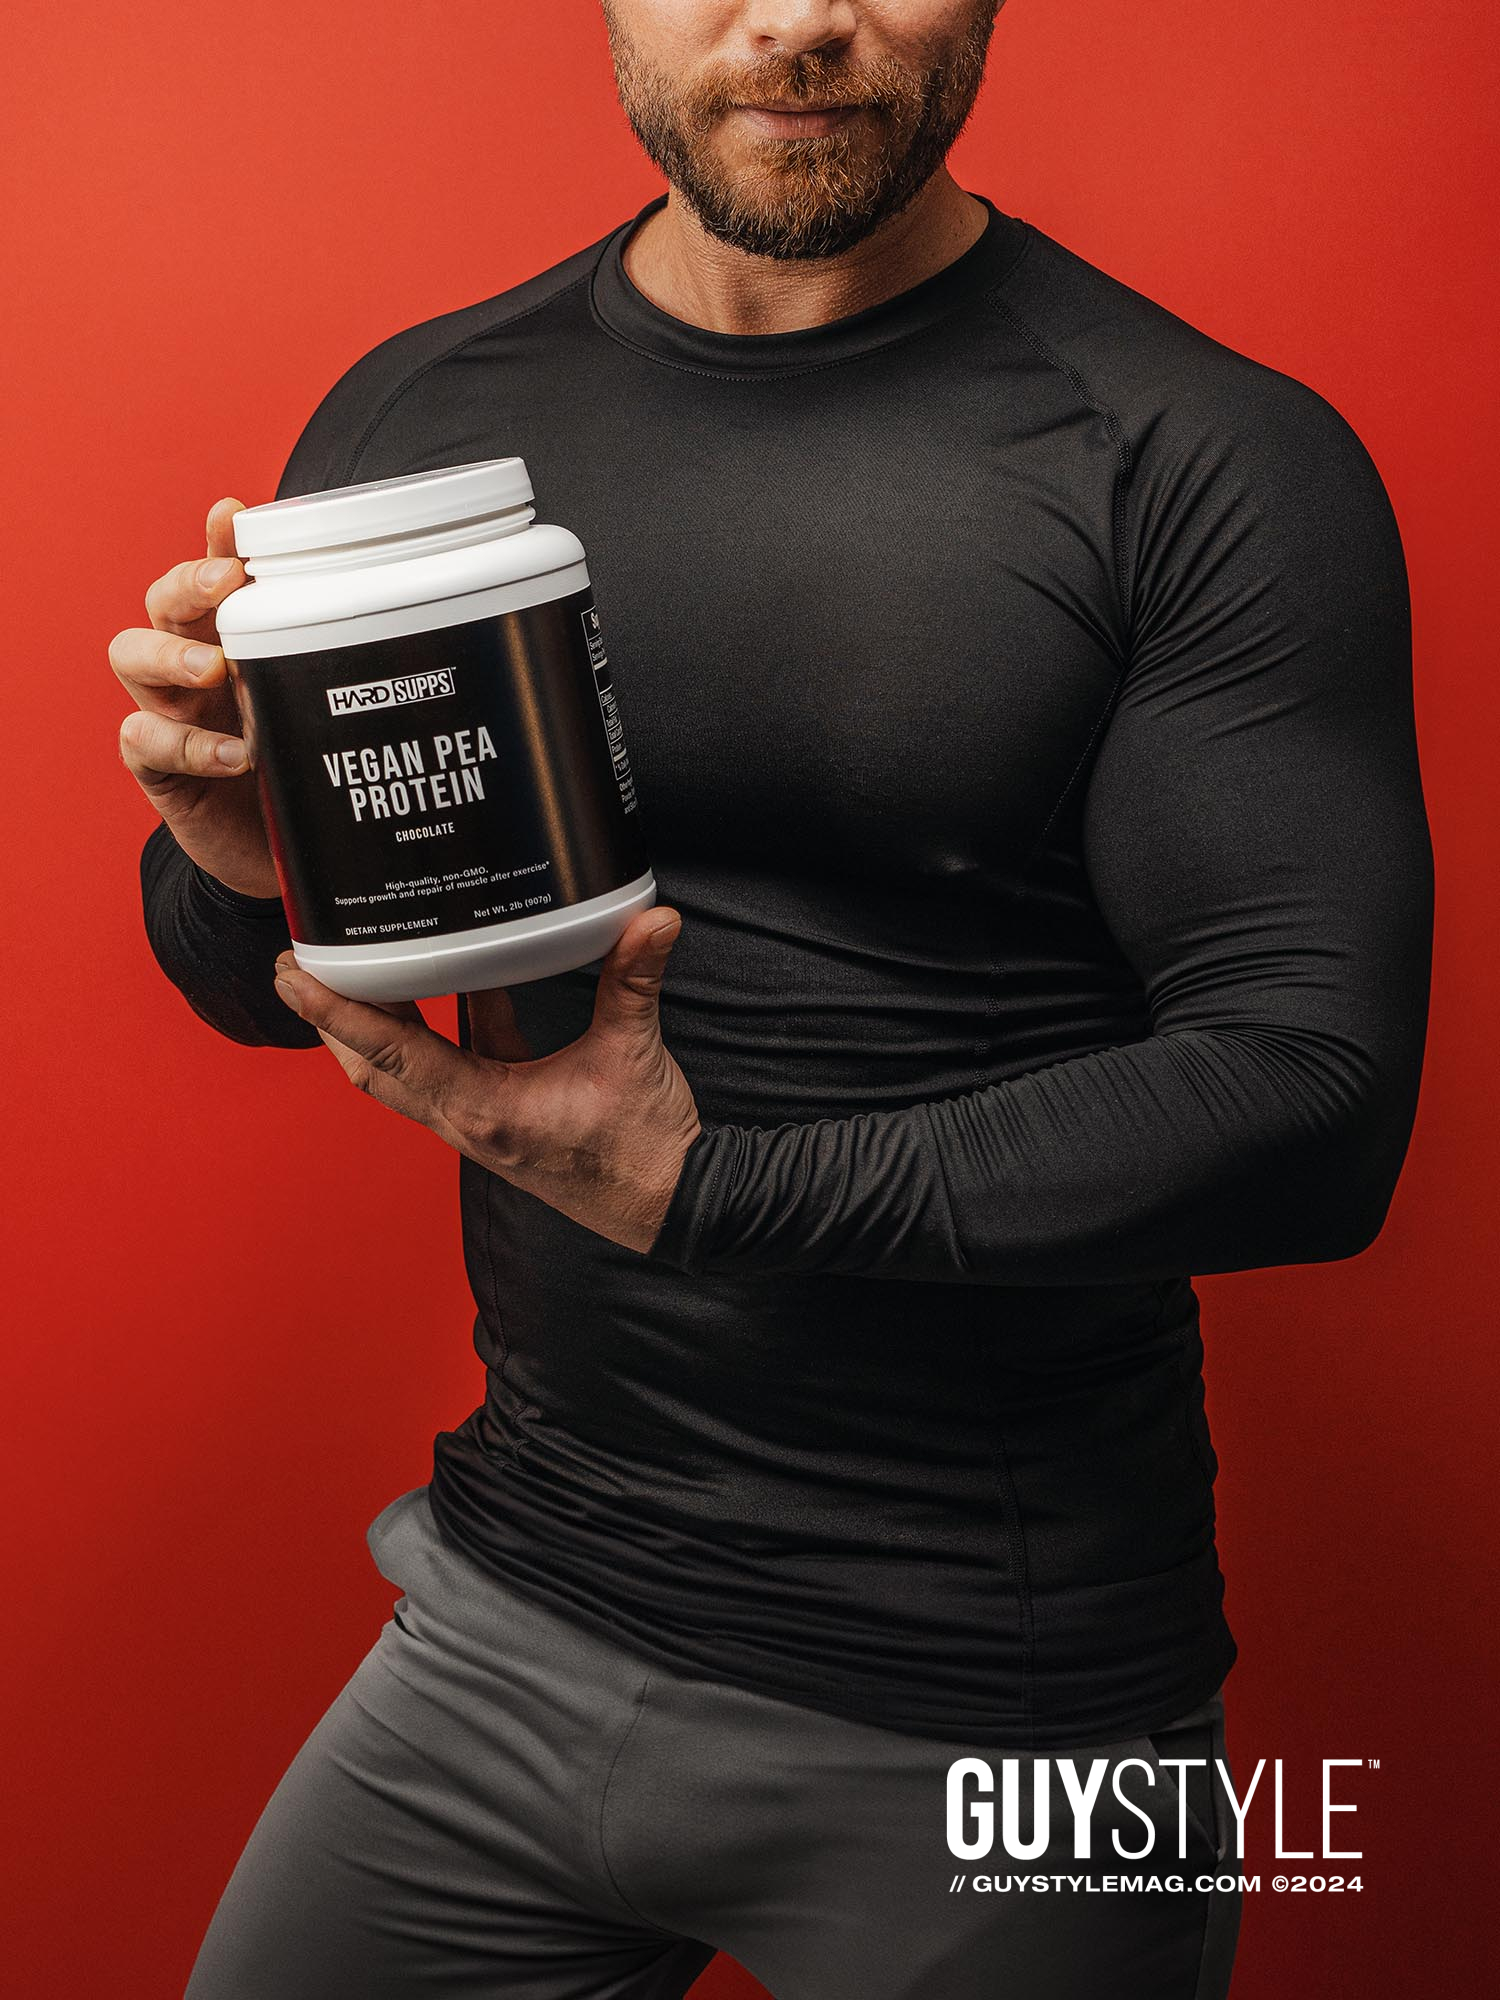 The Buffet of Buff: Fueling Your Bodybuilding Dreams with HARD SUPPS – Presented by HARD NEW YORK